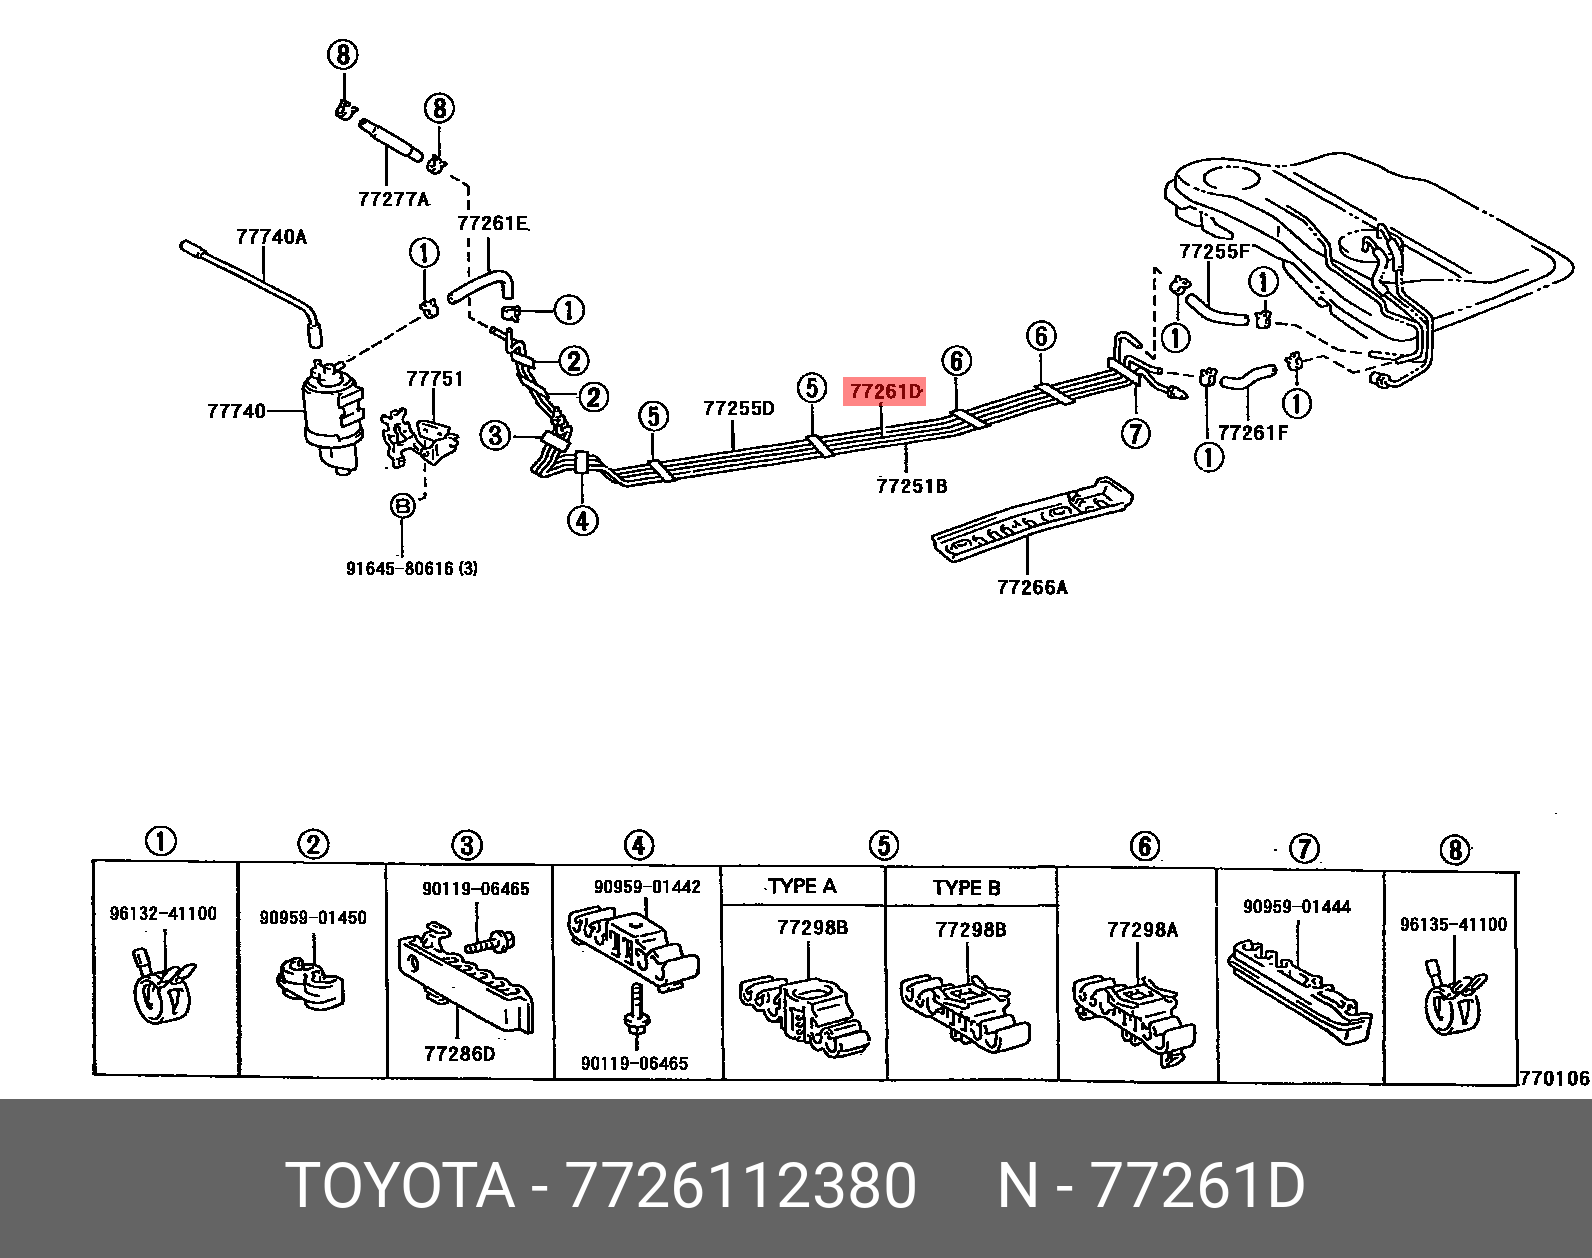 COROLLA 199505 - 200008, TUBE, FUEL TANK TO CANISTER